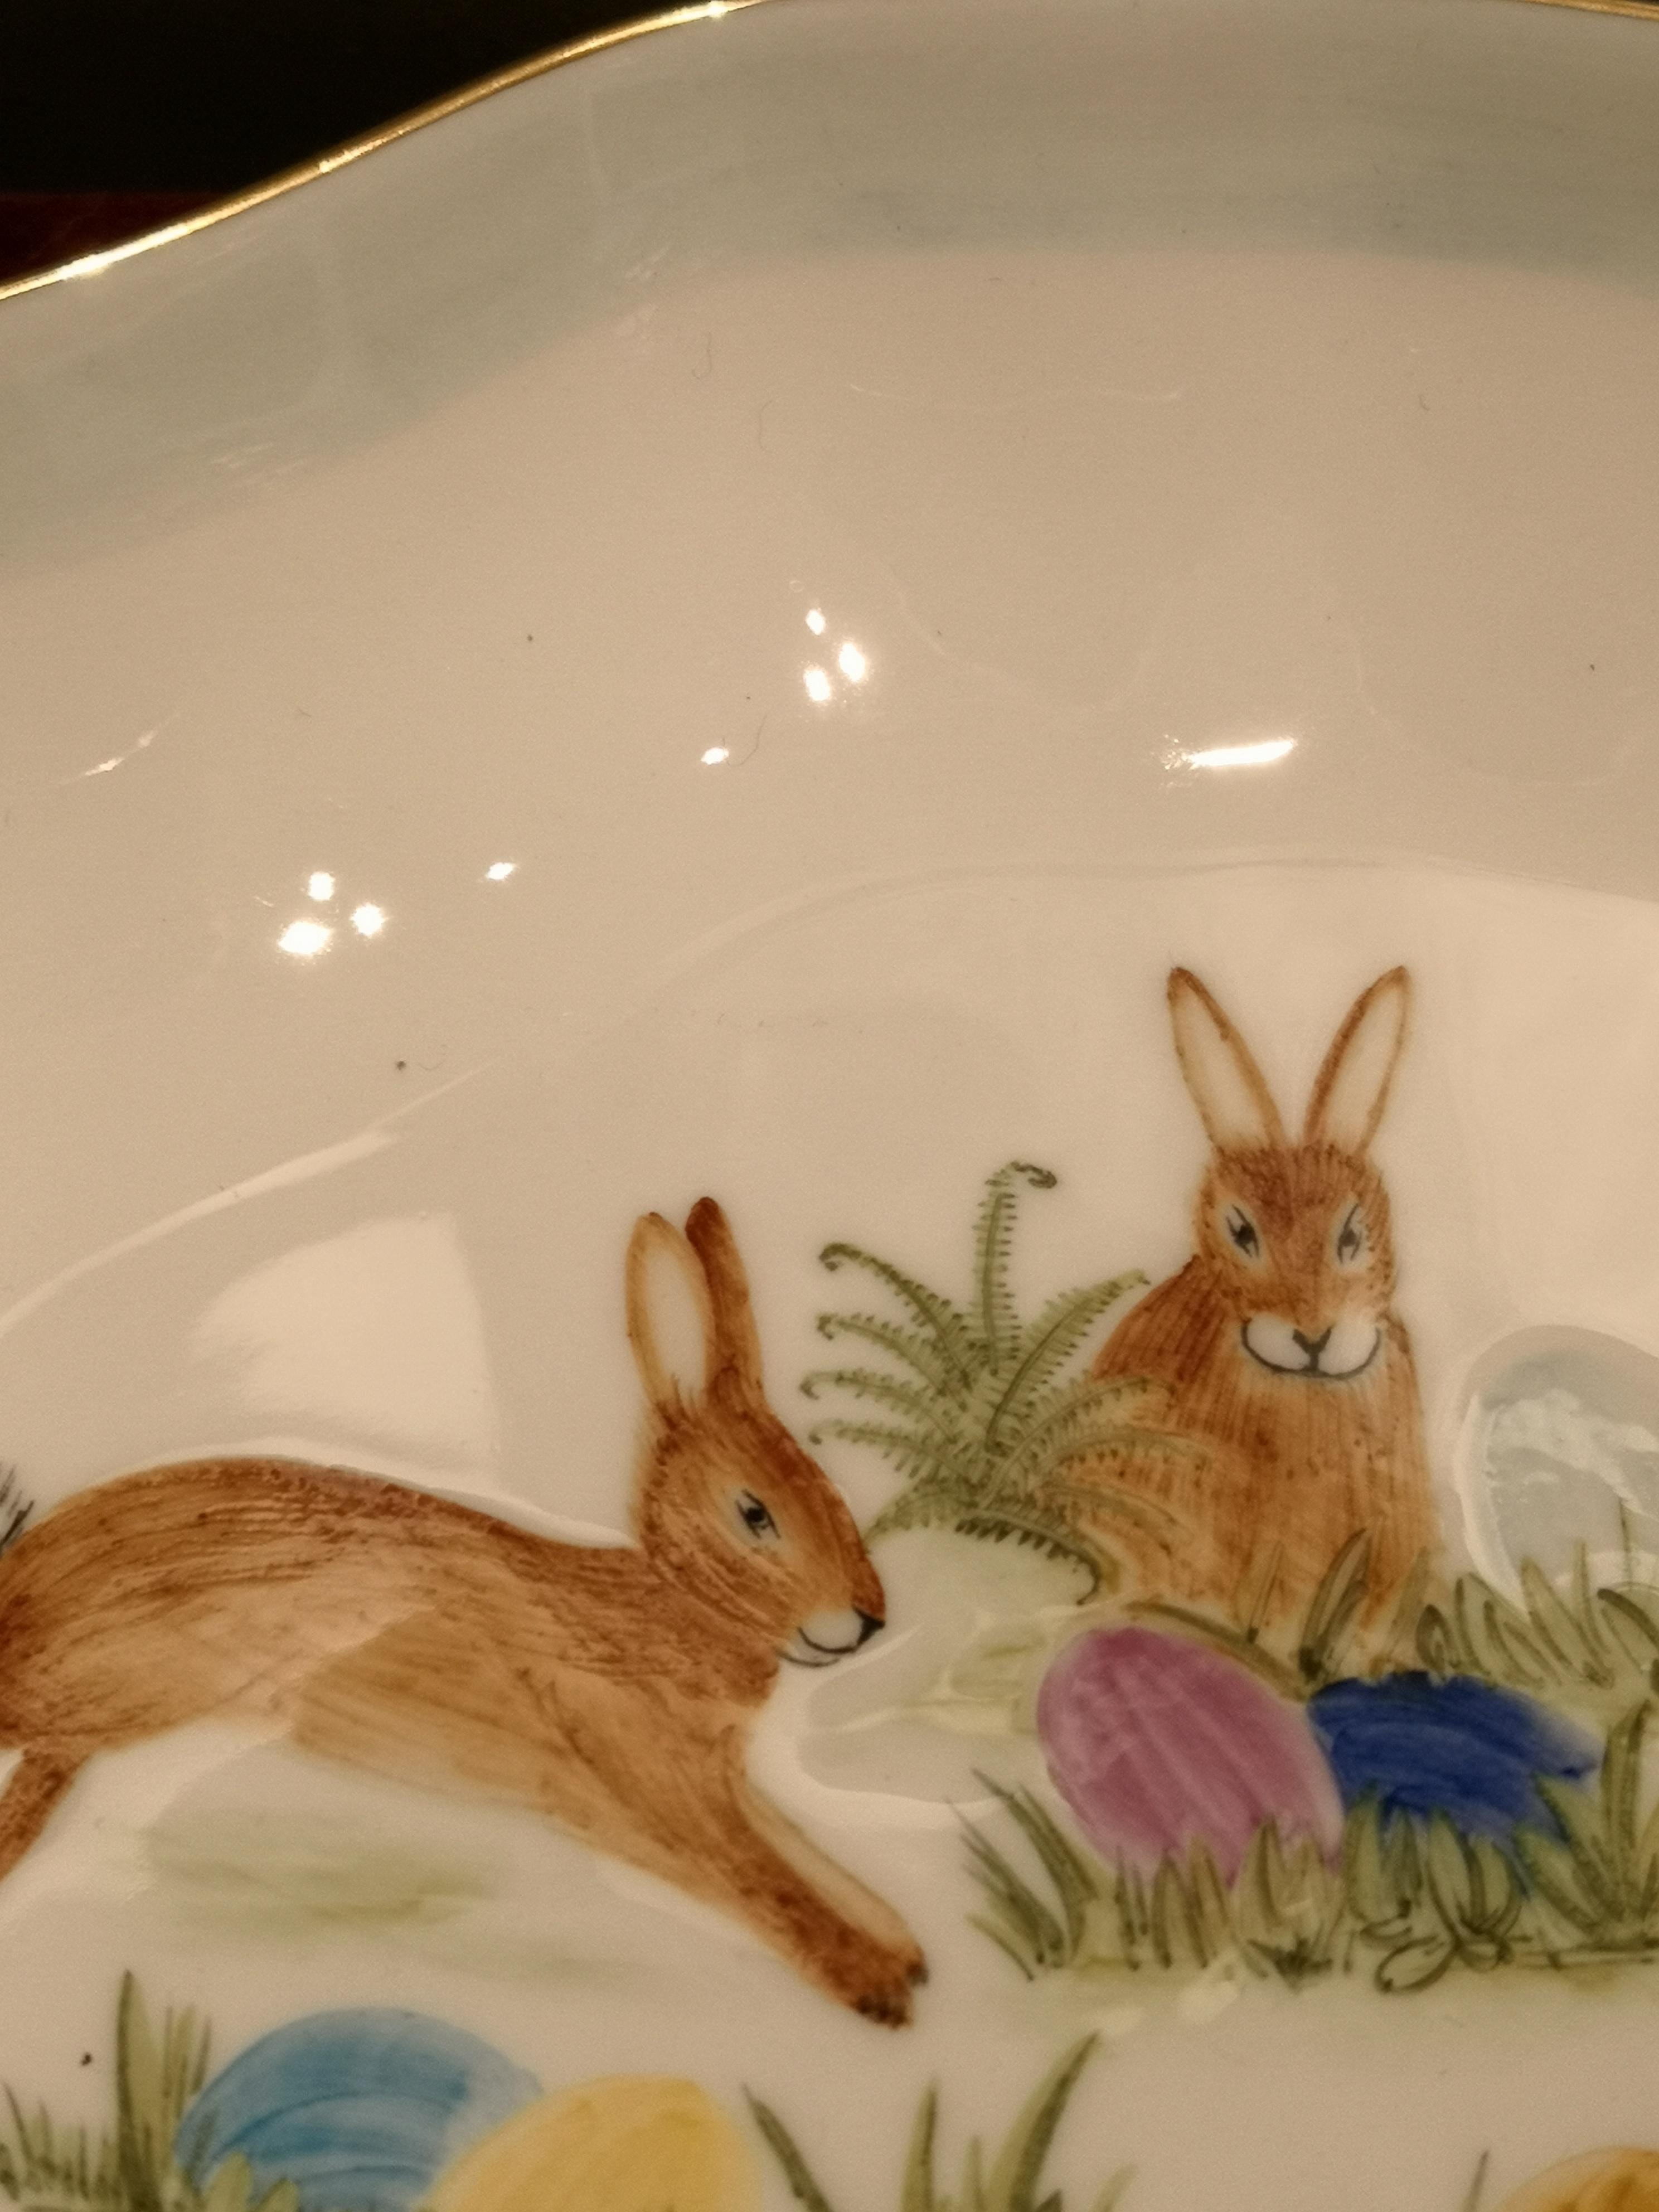 These completely handmade porcelain pastry dish is hands-free painted with a charming easter decor with rabbits and colored eggs. Rimmed by hand with a Fine 24 carat gold line. Handmade in Bavaria / Germany.
About Sofina porcelain:
Based on the